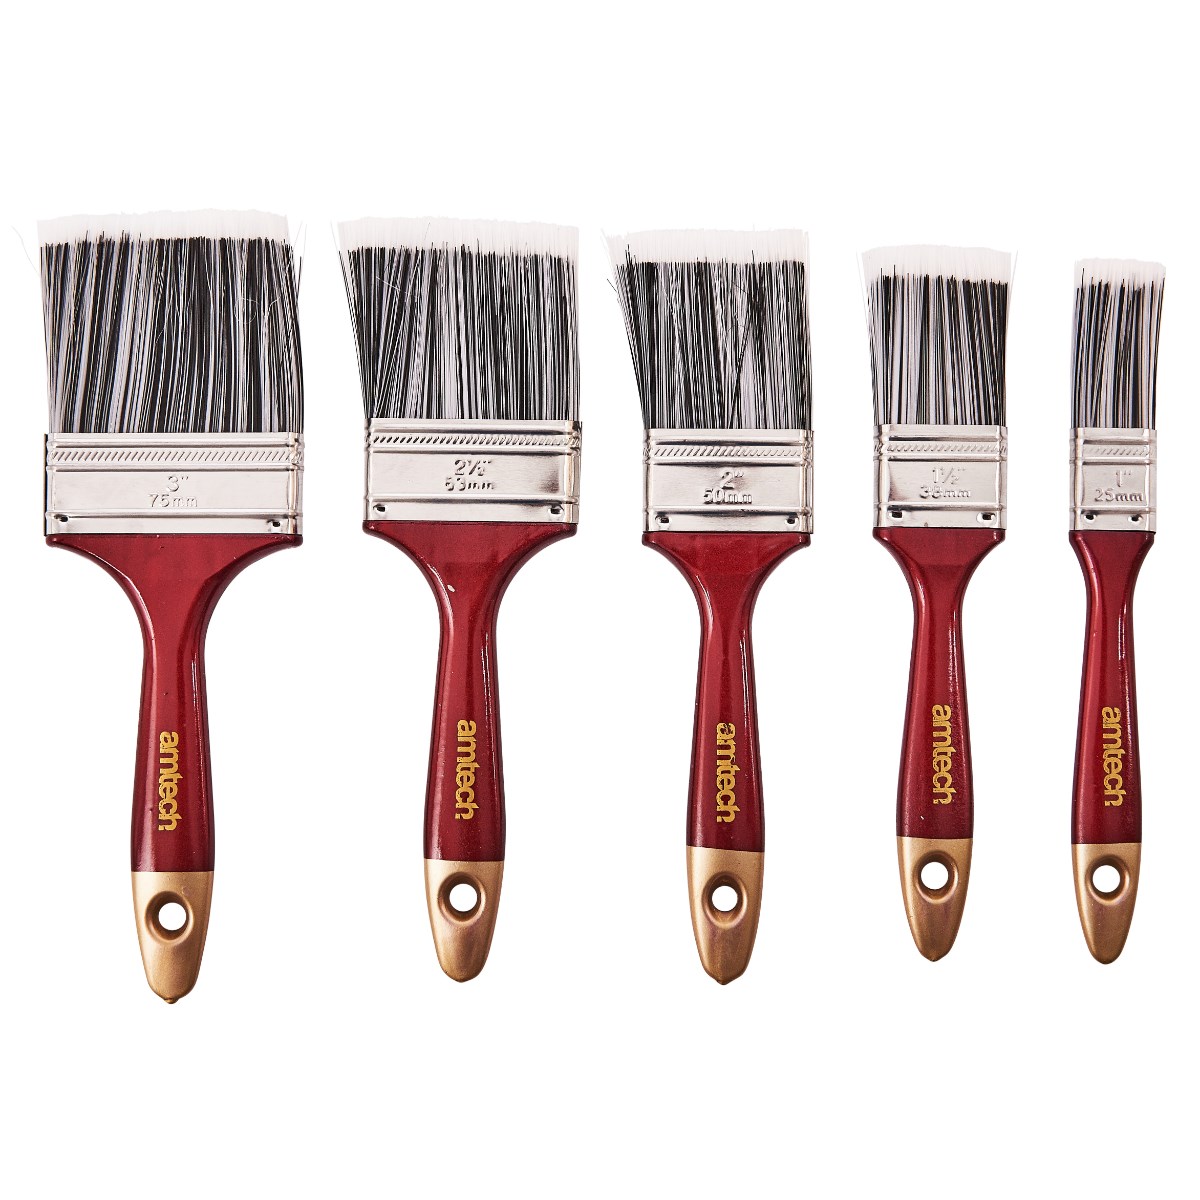 MBS Deluxe 1 1/2 Paint Brush - Whatchamacallit Tools